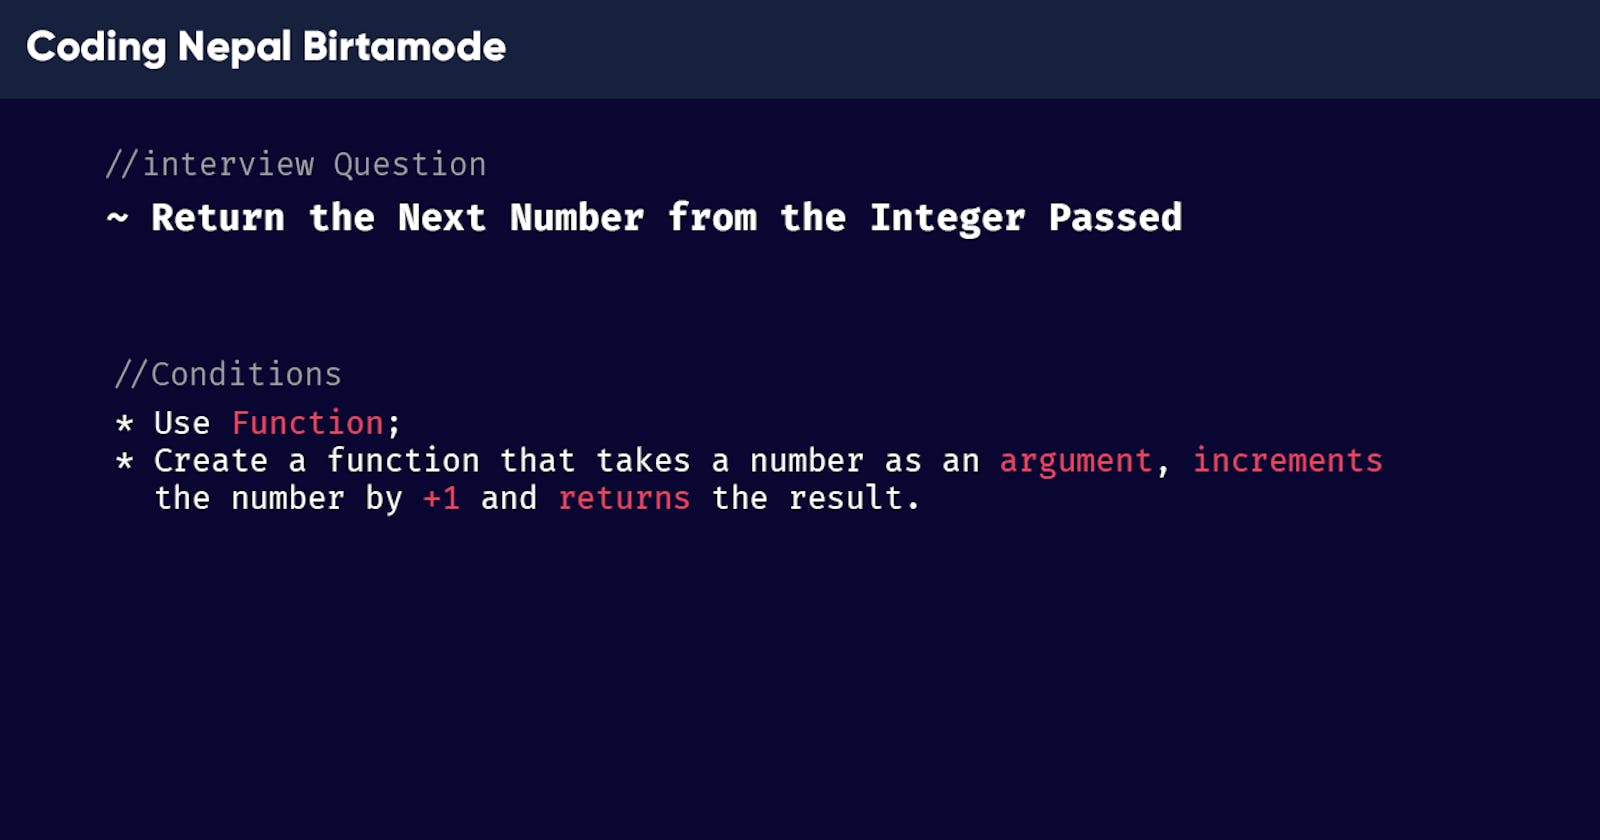 Return the Next Number from the Integer Passed